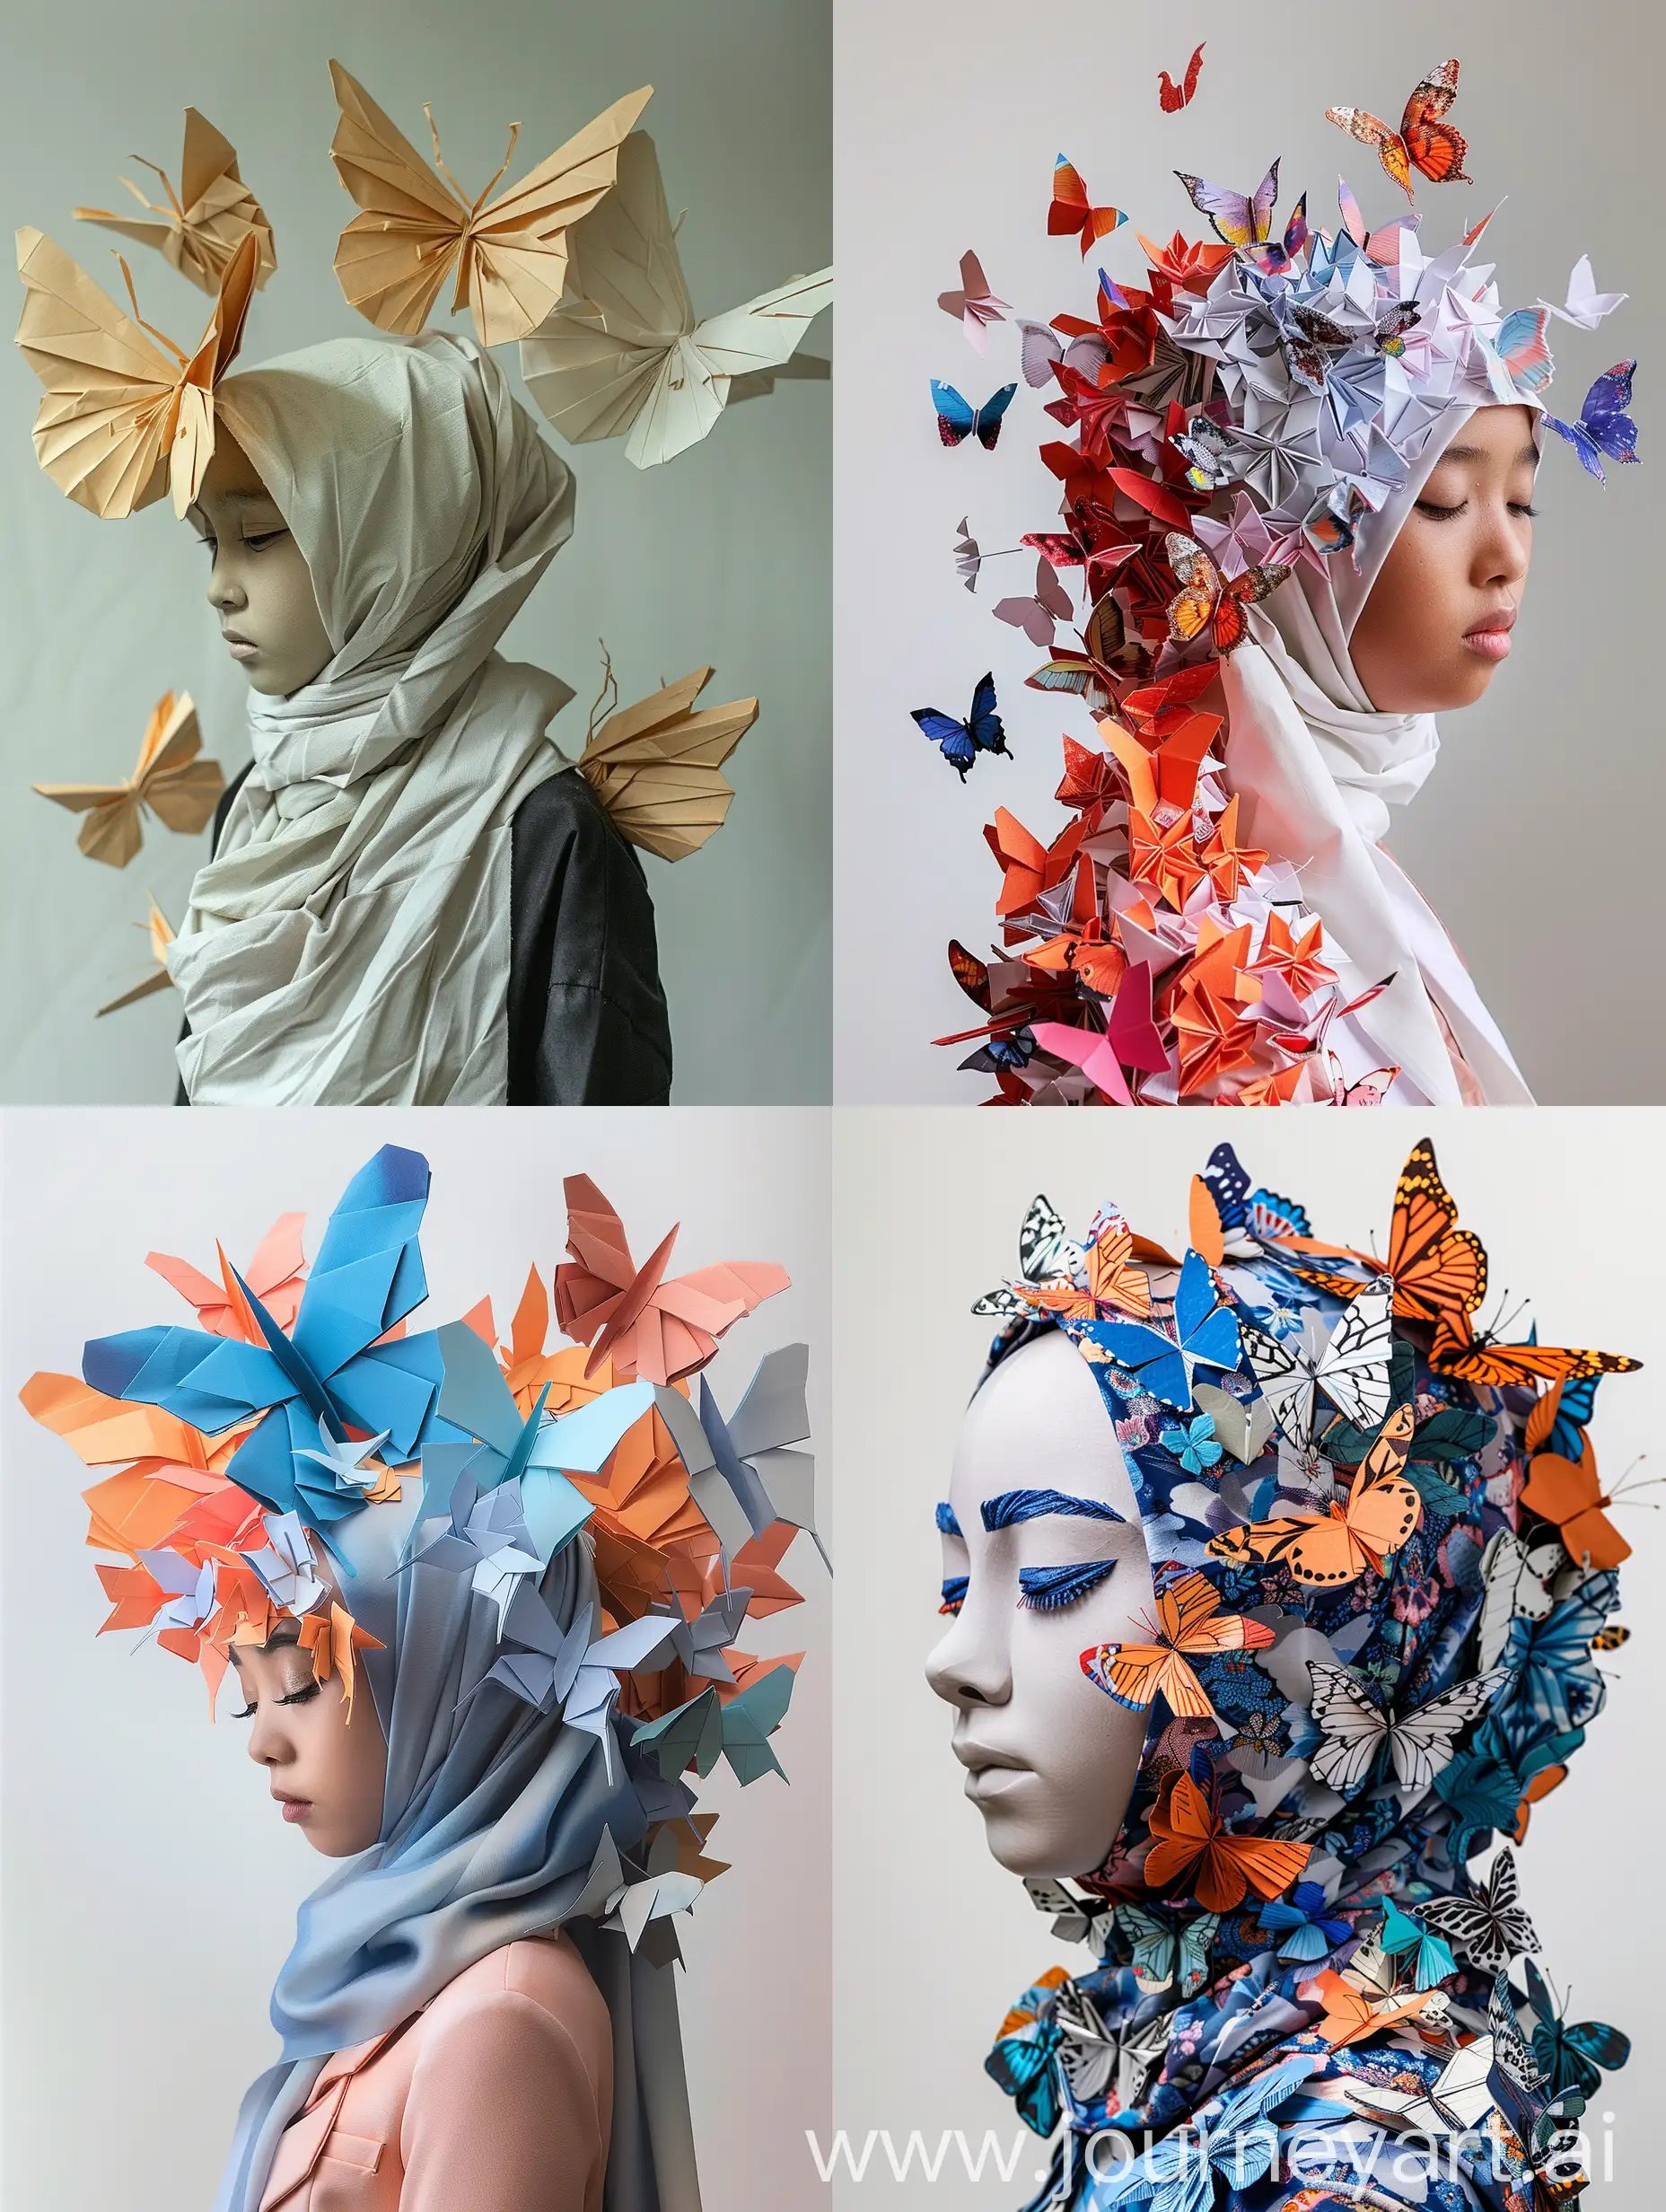 Girl-in-Hijab-with-Butterfly-Origami-Sculptures